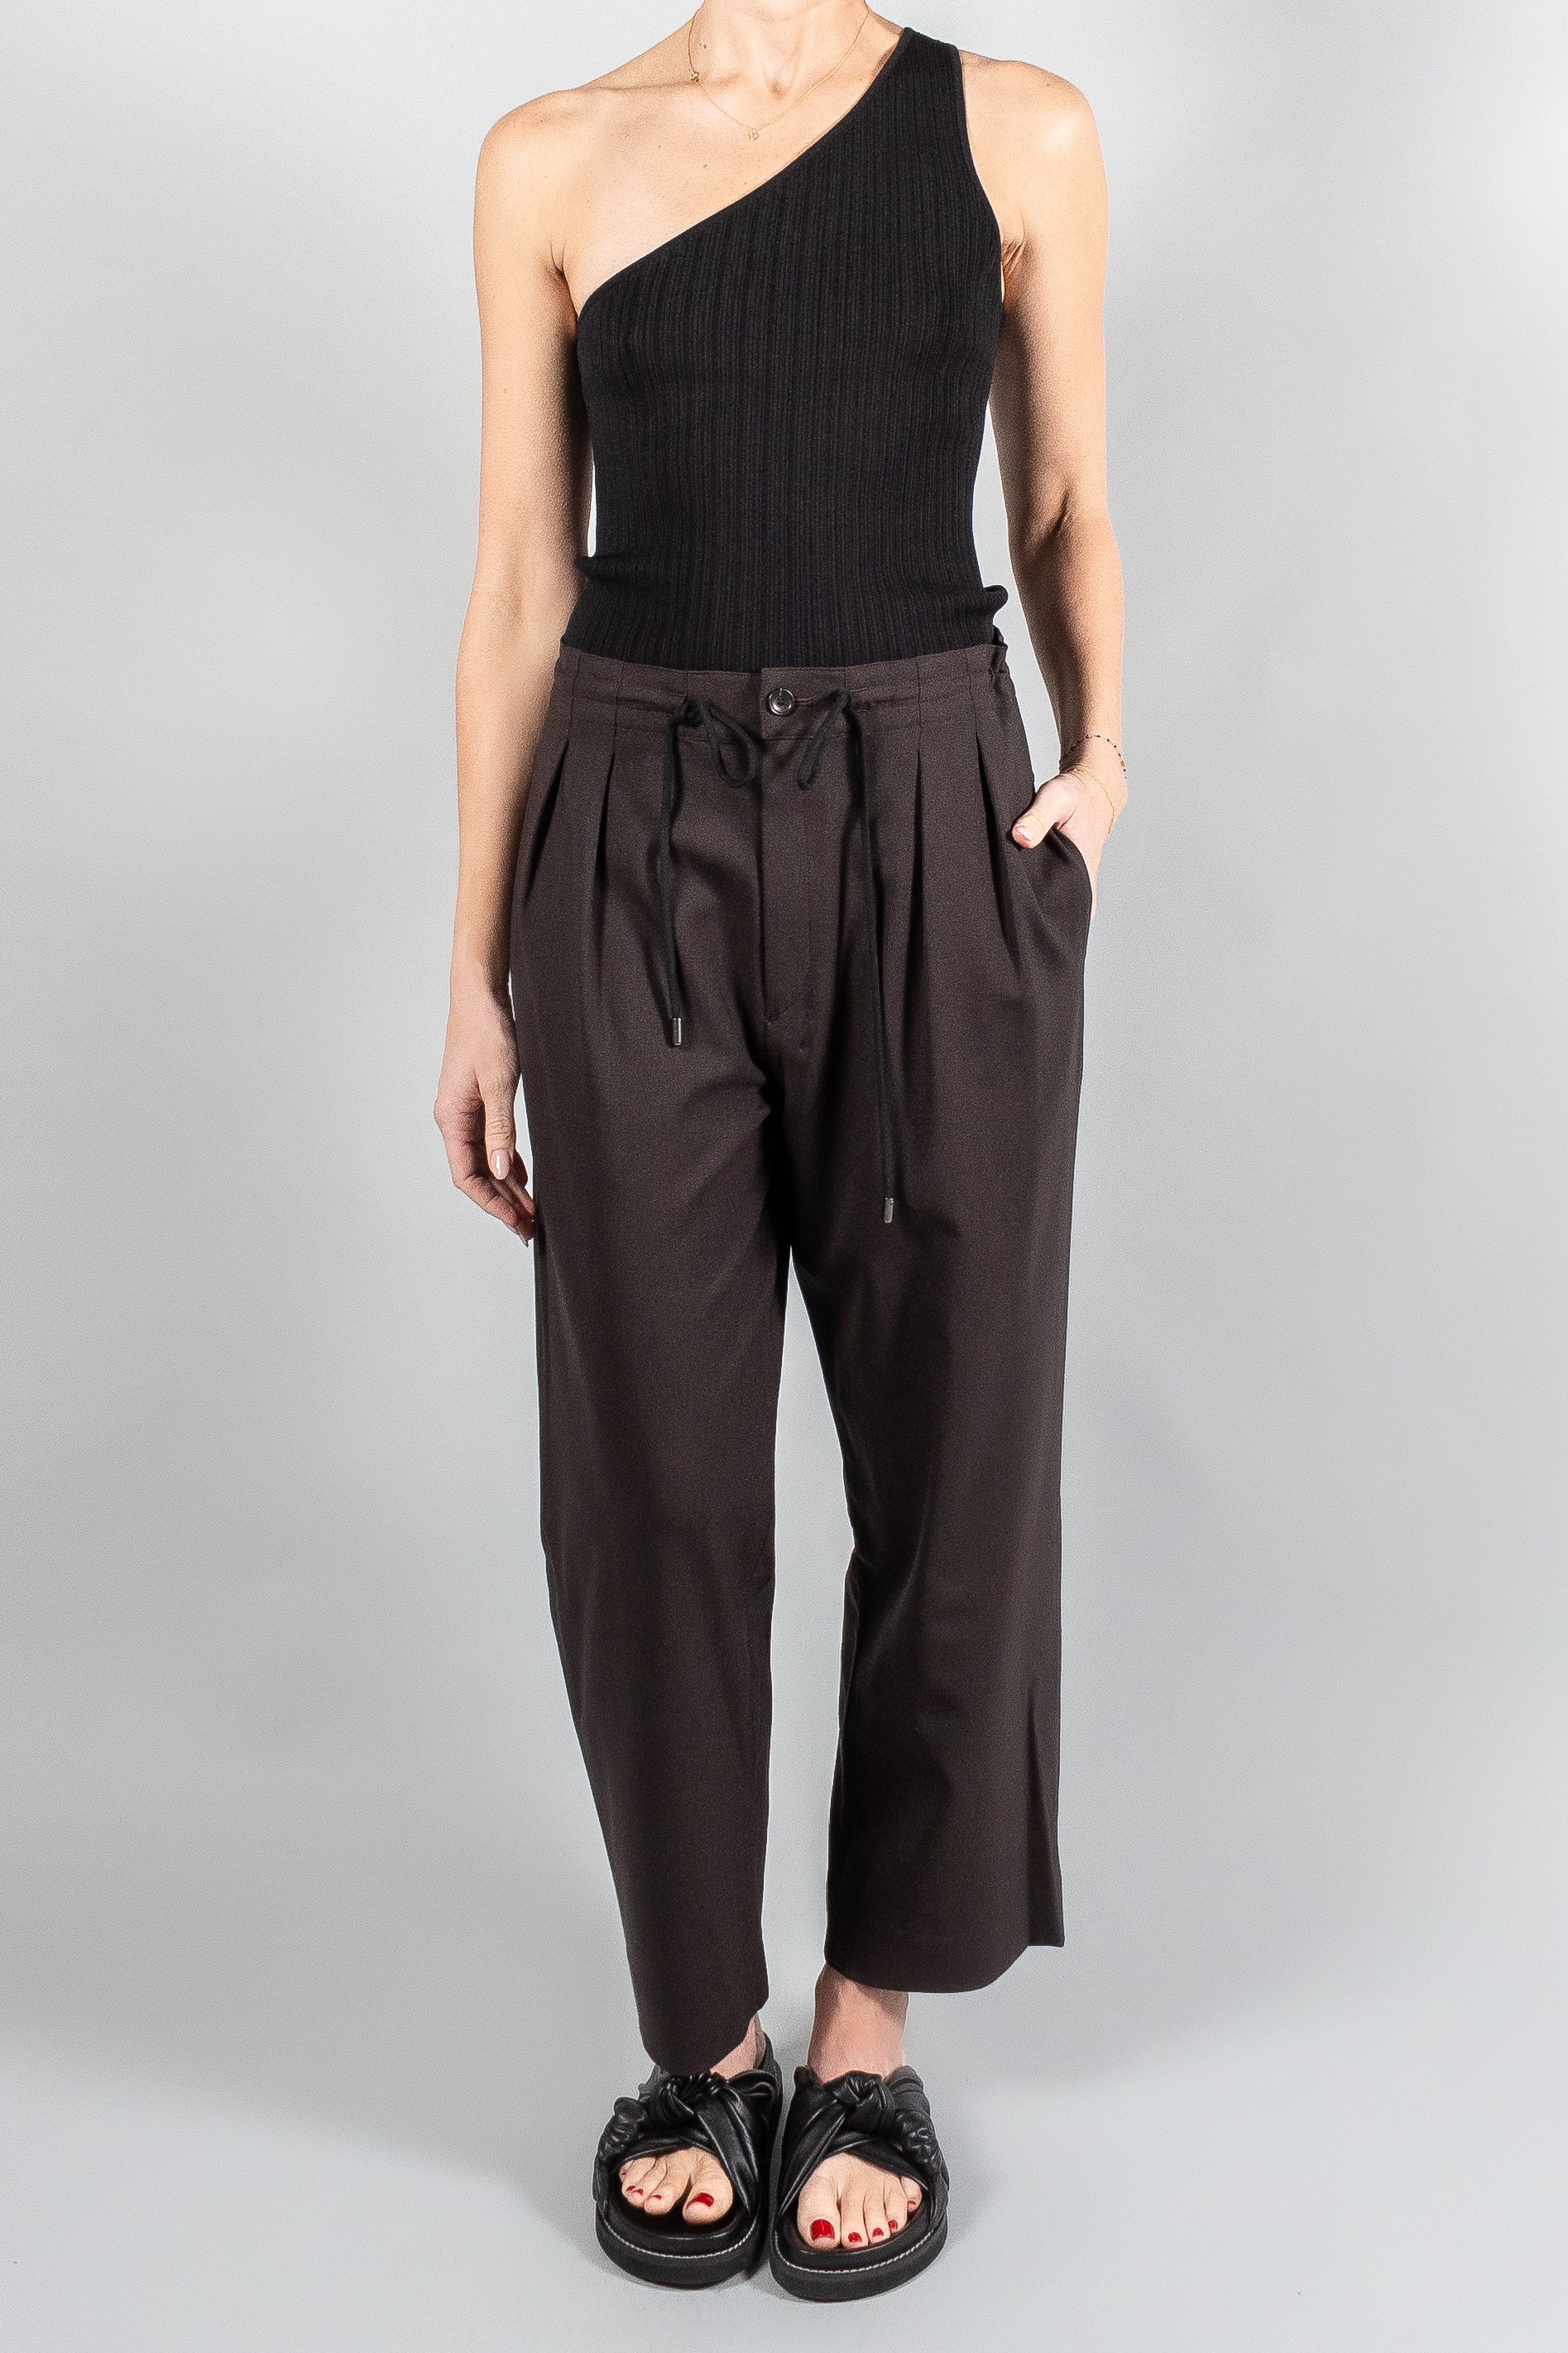 Maria Mcmanus Pleat Front Drawstring Trouser-Pants and Shorts-Misch-Boutique-Vancouver-Canada-misch.ca